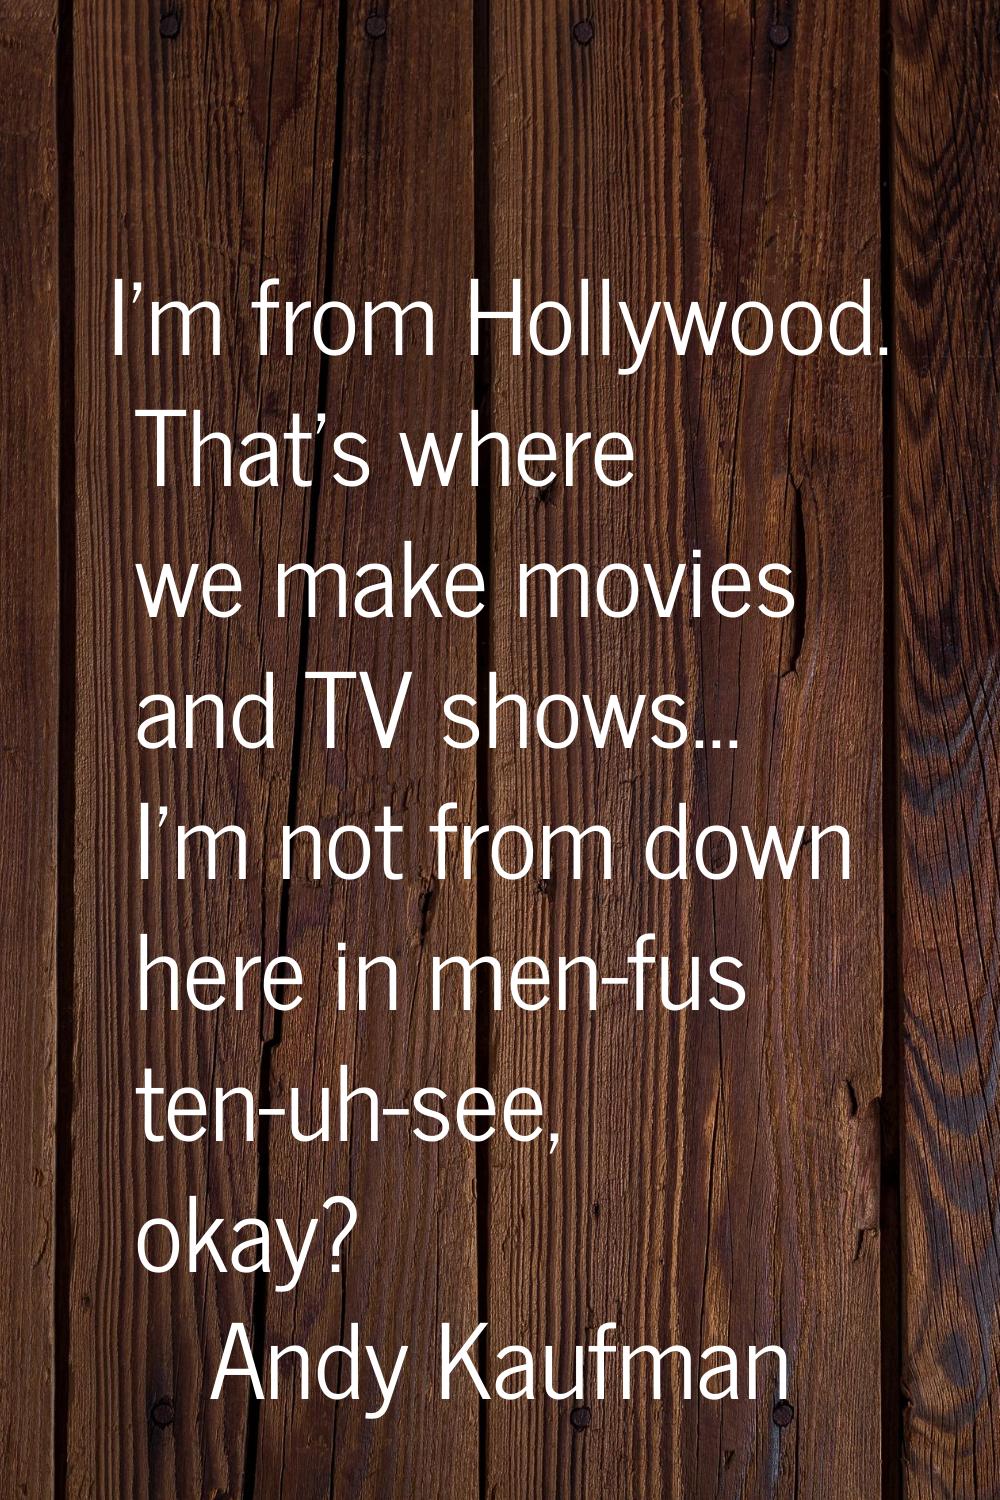 I'm from Hollywood. That's where we make movies and TV shows... I'm not from down here in men-fus t